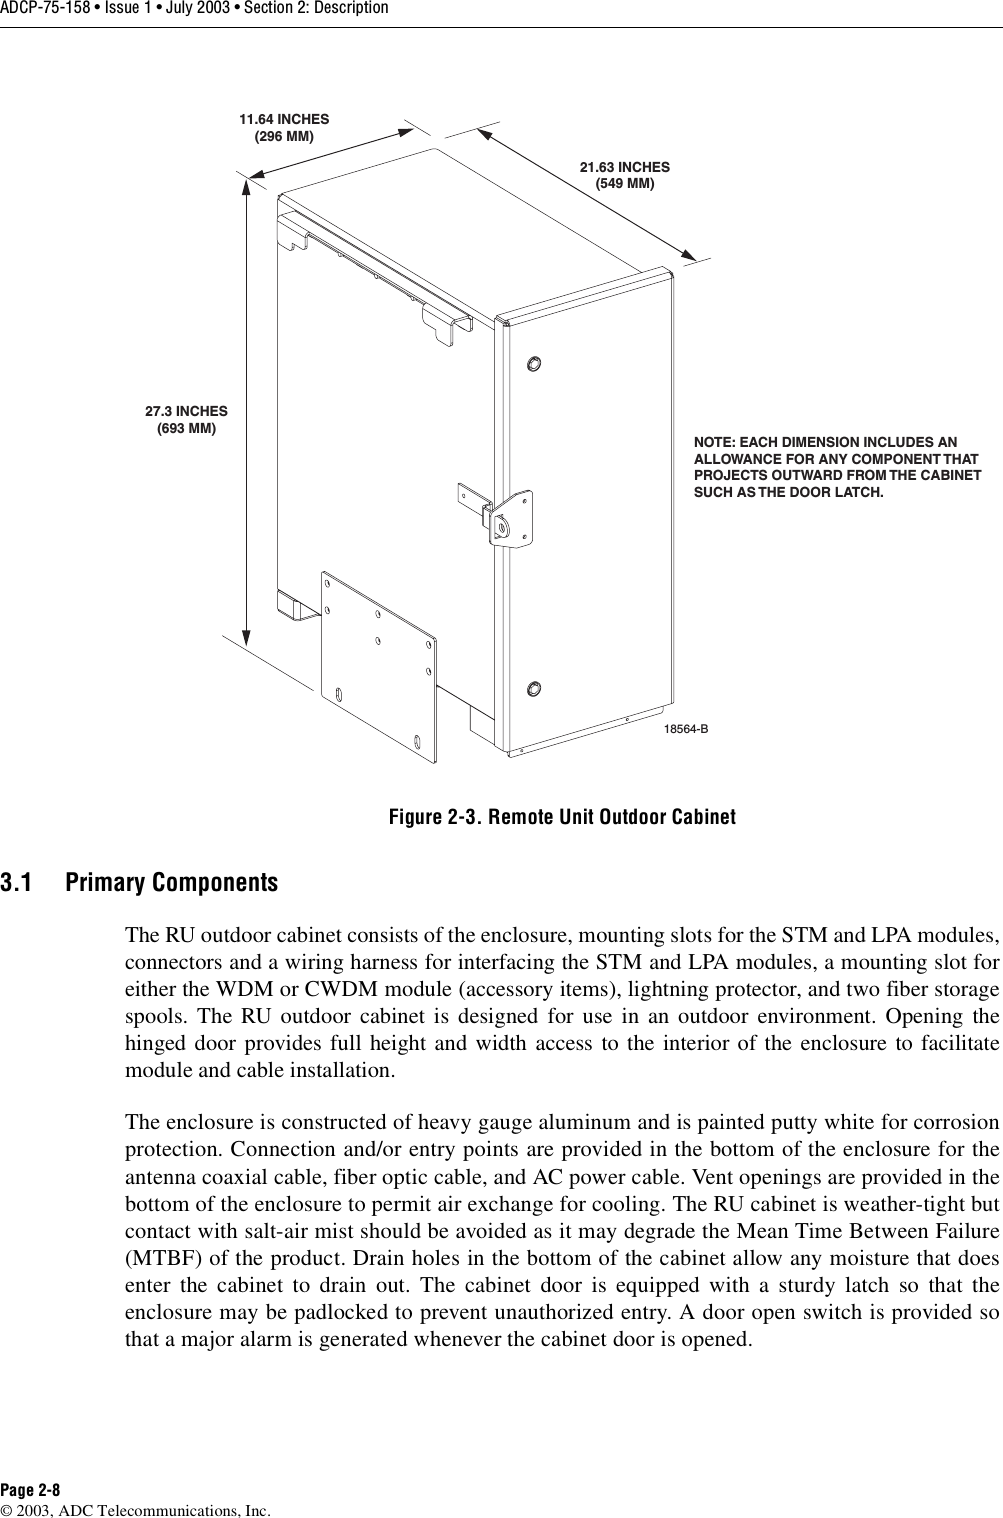 ADCP-75-158 • Issue 1 • July 2003 • Section 2: DescriptionPage 2-8© 2003, ADC Telecommunications, Inc.Figure 2-3. Remote Unit Outdoor Cabinet3.1 Primary ComponentsThe RU outdoor cabinet consists of the enclosure, mounting slots for the STM and LPA modules,connectors and a wiring harness for interfacing the STM and LPA modules, a mounting slot foreither the WDM or CWDM module (accessory items), lightning protector, and two fiber storagespools. The RU outdoor cabinet is designed for use in an outdoor environment. Opening thehinged door provides full height and width access to the interior of the enclosure to facilitatemodule and cable installation. The enclosure is constructed of heavy gauge aluminum and is painted putty white for corrosionprotection. Connection and/or entry points are provided in the bottom of the enclosure for theantenna coaxial cable, fiber optic cable, and AC power cable. Vent openings are provided in thebottom of the enclosure to permit air exchange for cooling. The RU cabinet is weather-tight butcontact with salt-air mist should be avoided as it may degrade the Mean Time Between Failure(MTBF) of the product. Drain holes in the bottom of the cabinet allow any moisture that doesenter the cabinet to drain out. The cabinet door is equipped with a sturdy latch so that theenclosure may be padlocked to prevent unauthorized entry. A door open switch is provided sothat a major alarm is generated whenever the cabinet door is opened. NOTE: EACH DIMENSION INCLUDES ANALLOWANCE FOR ANY COMPONENT THATPROJECTS OUTWARD FROM THE CABINETSUCH AS THE DOOR LATCH. 18564-B27.3 INCHES(693 MM)11.64 INCHES(296 MM)21.63 INCHES(549 MM)